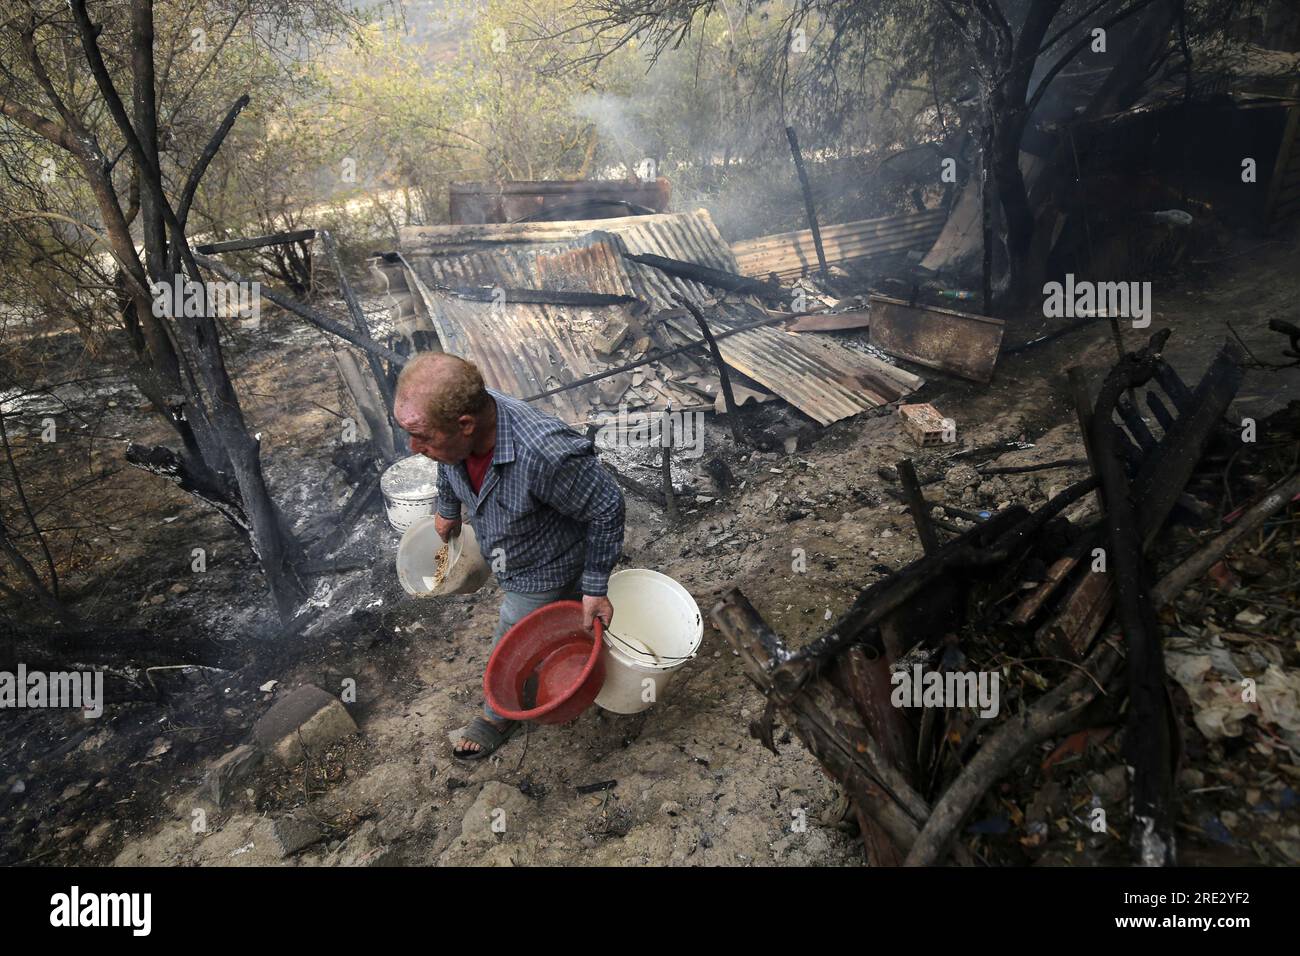 (230724) -- BOUIRA (ALGERIA), July 24, 2023 (Xinhua) -- A man walks past a house burned down in a wildfire in Bouira Province, Algeria, on July 24, 2023. The death toll from wildfires in northern Algeria has risen to 34, including 10 soldiers, the Interior Ministry said in an update on Monday. (Xinhua) Stock Photo